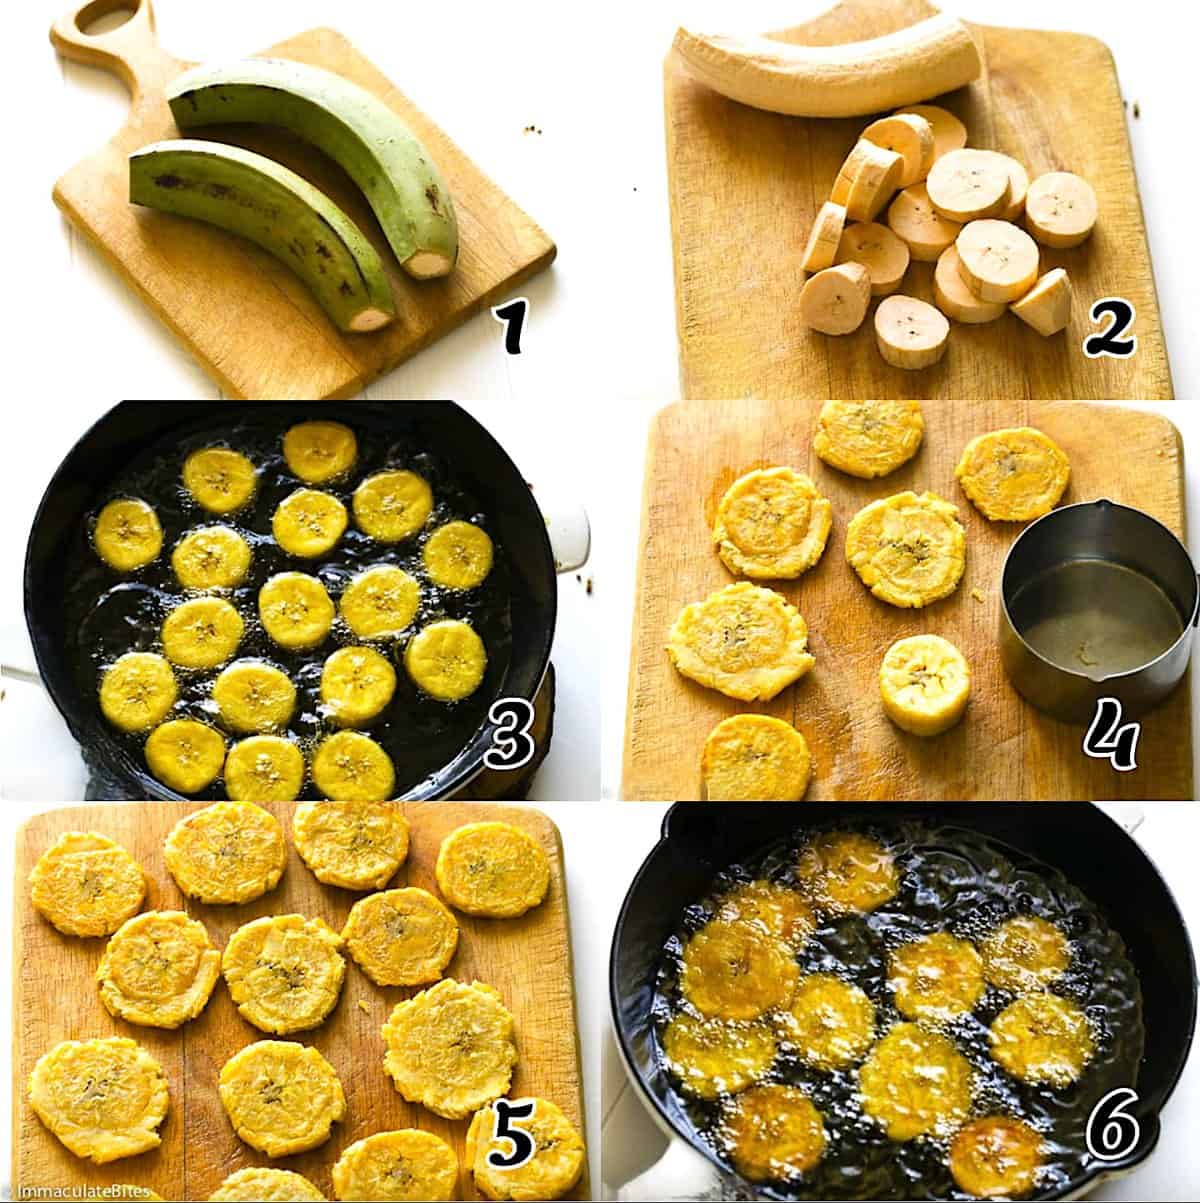 Peel and slice the plantain, fry, mash, and fry again